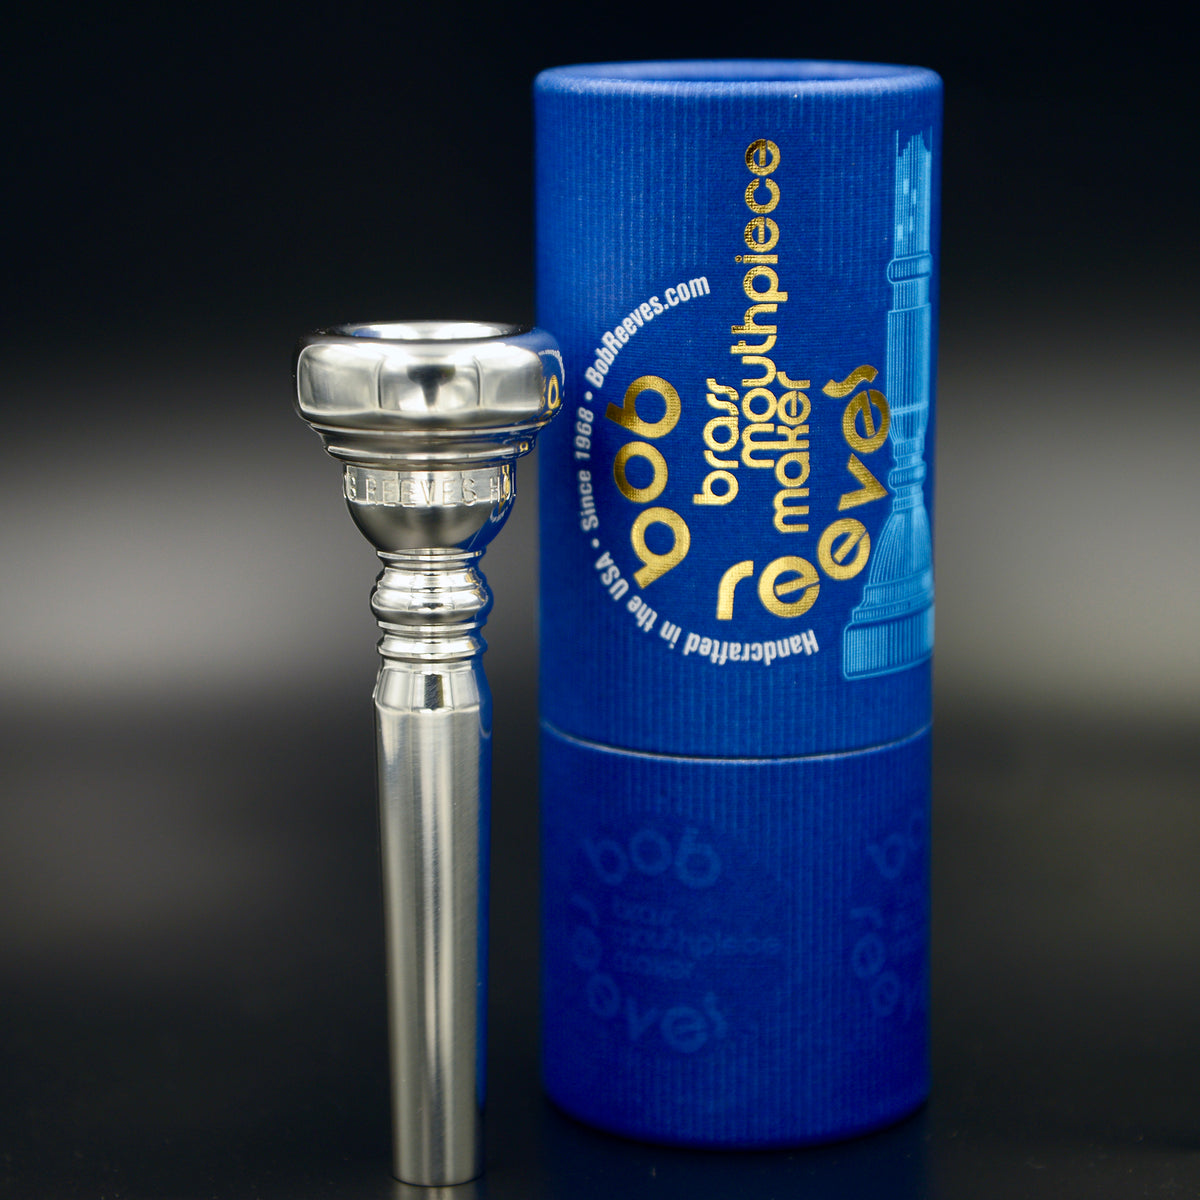 Bob Reeves Trumpet Mouthpiece – Bob Reeves Brass